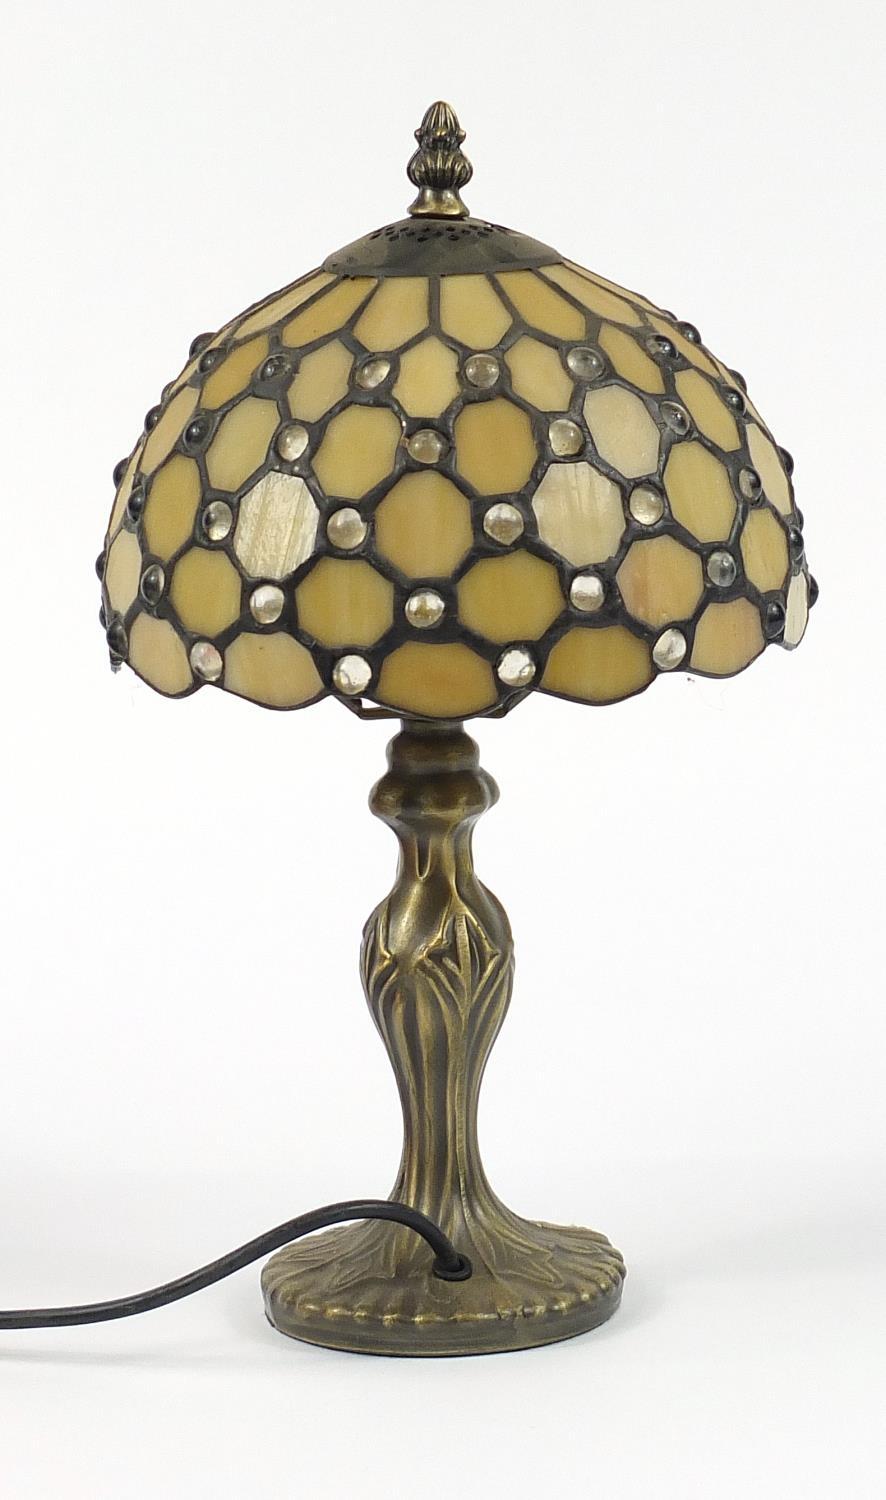 Bronzed Tiffany design table lamp with shade, 36cm high - Image 2 of 2